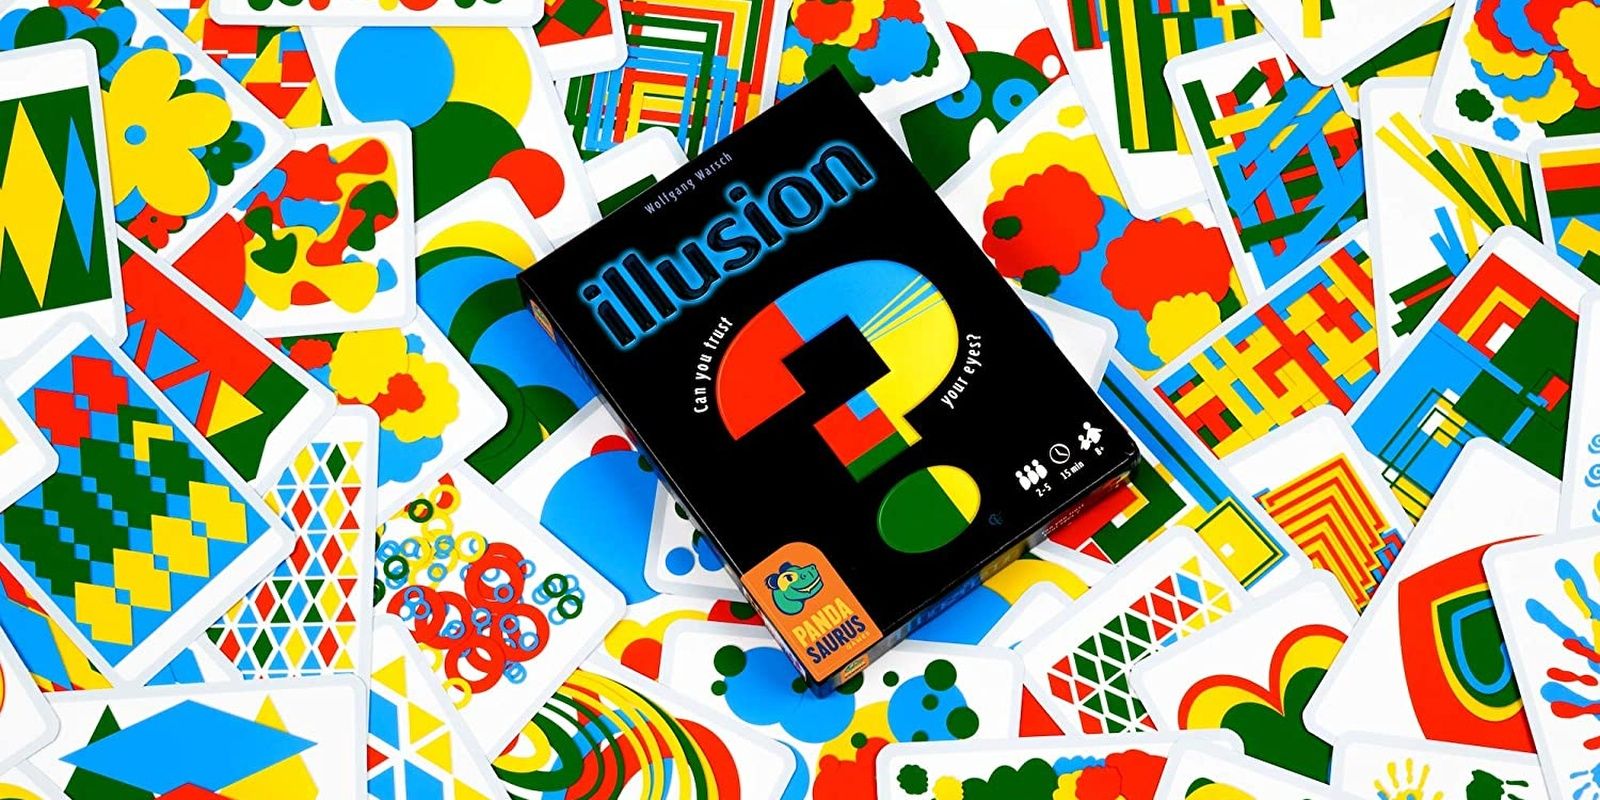 Illusion Board Game Components In The Box And Cover